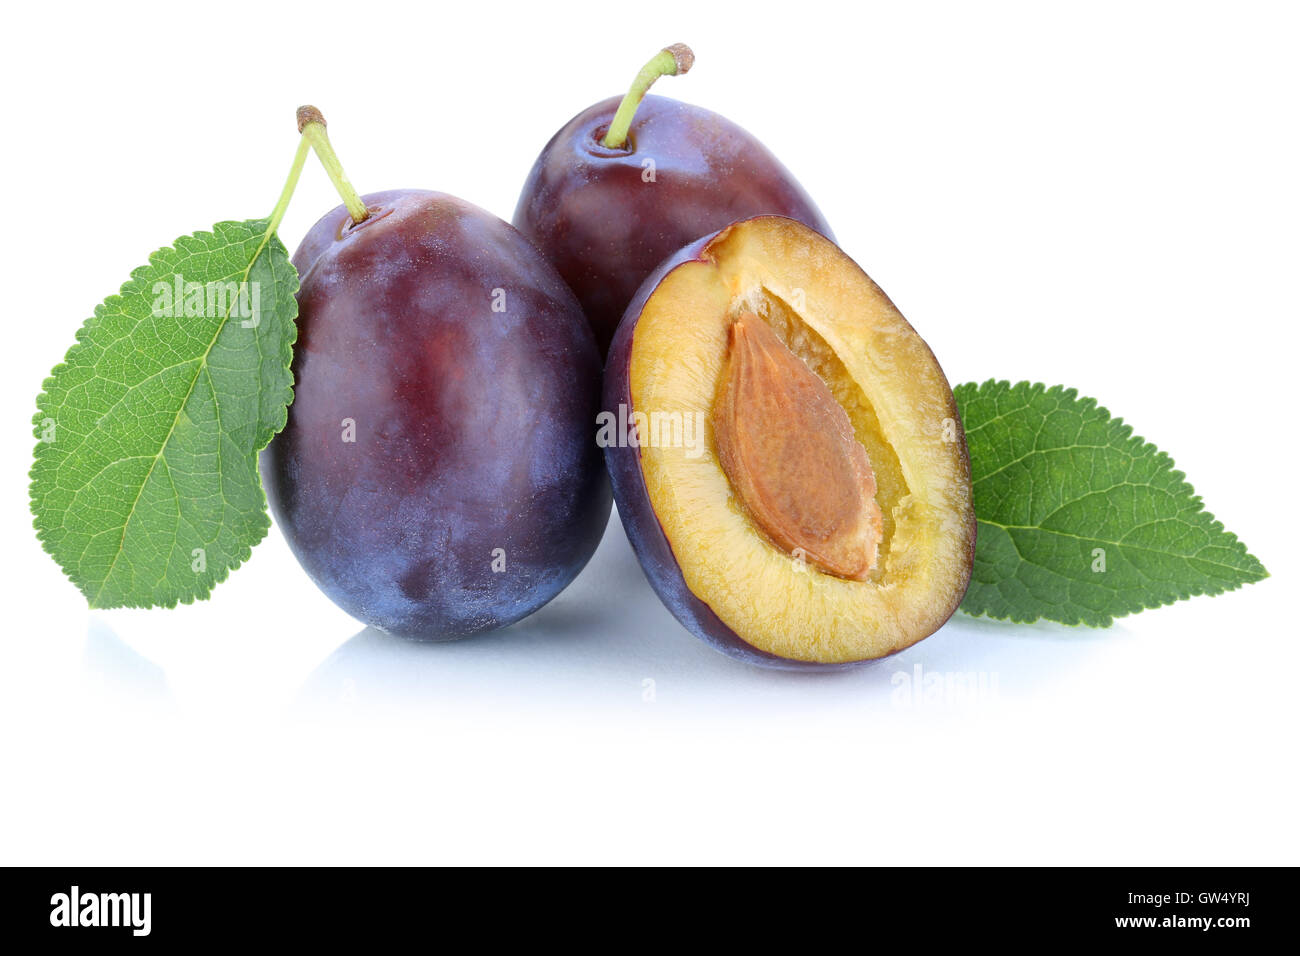 Plums plum prunes prune fresh fruits fruit isolated on a white background Stock Photo